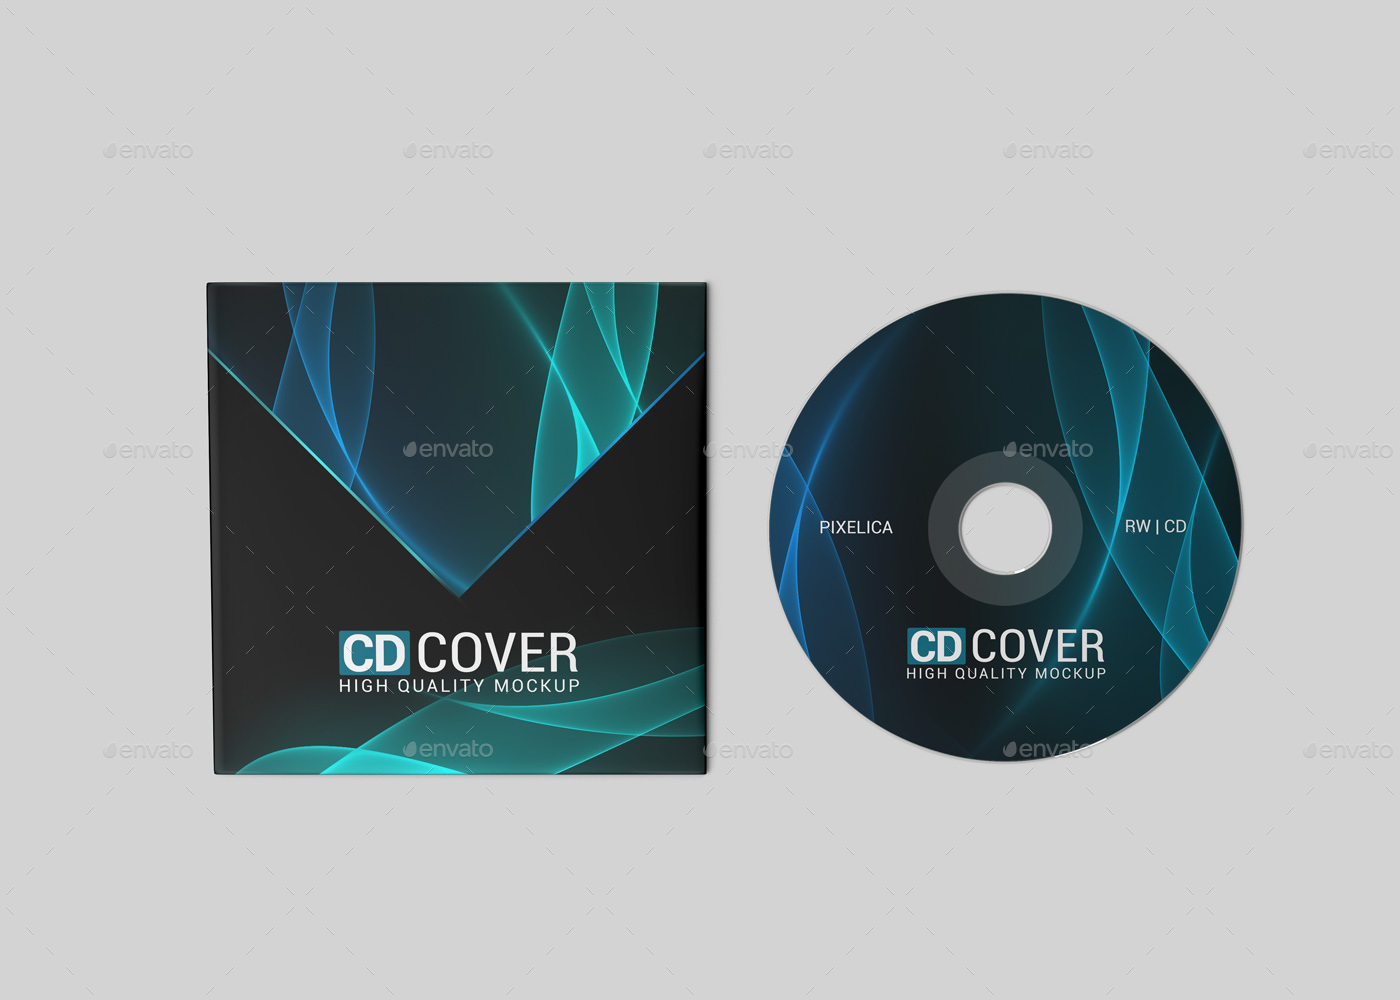 Download CD Cover Mockup by Pixelica21 | GraphicRiver